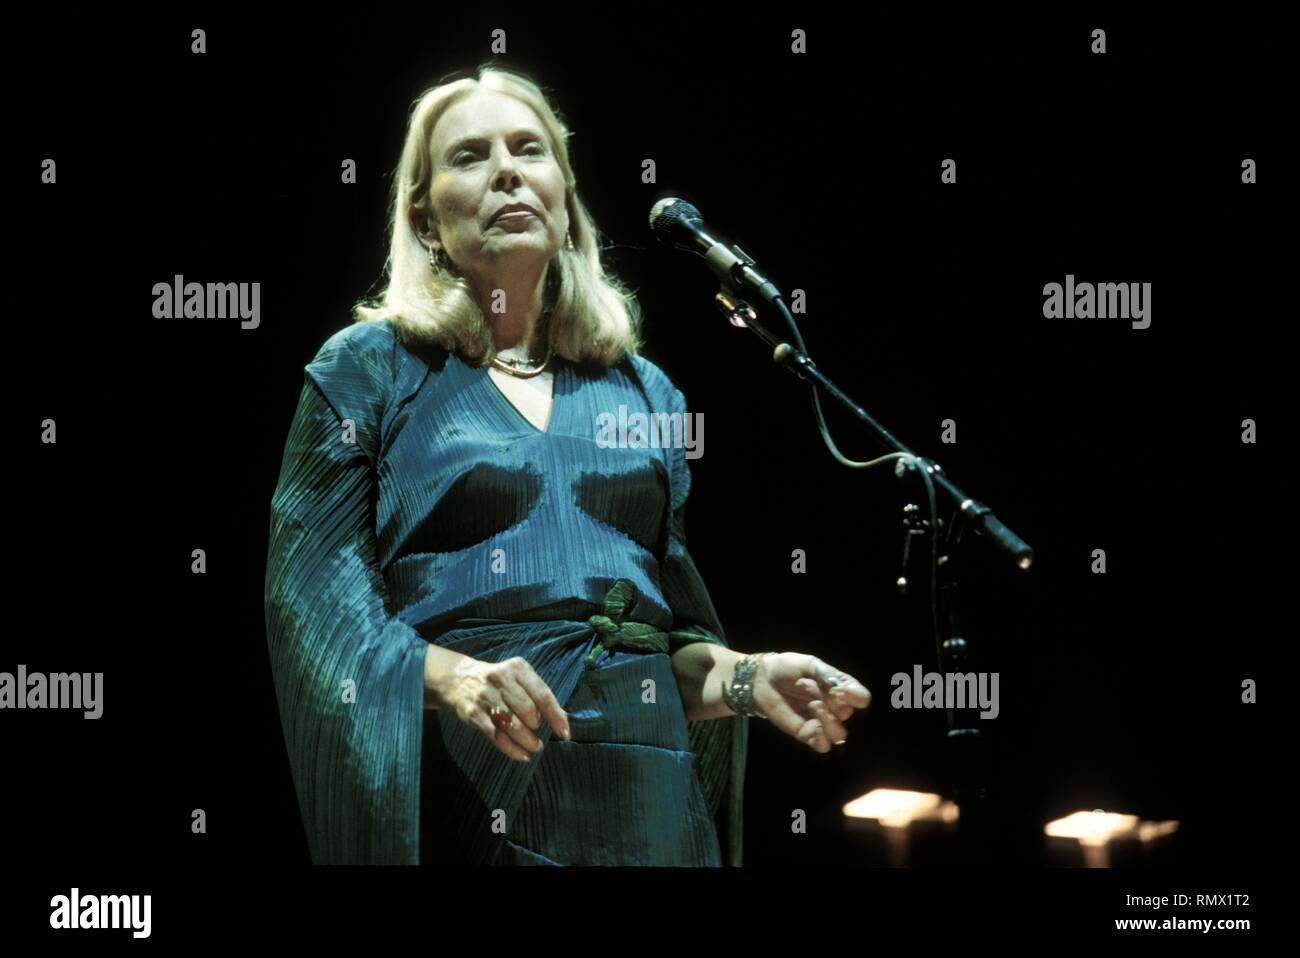 Canadian singer, musician, songwriter, and painter Joni Mitchell is shown performing on stage during a 'live' concert appearance. Stock Photo